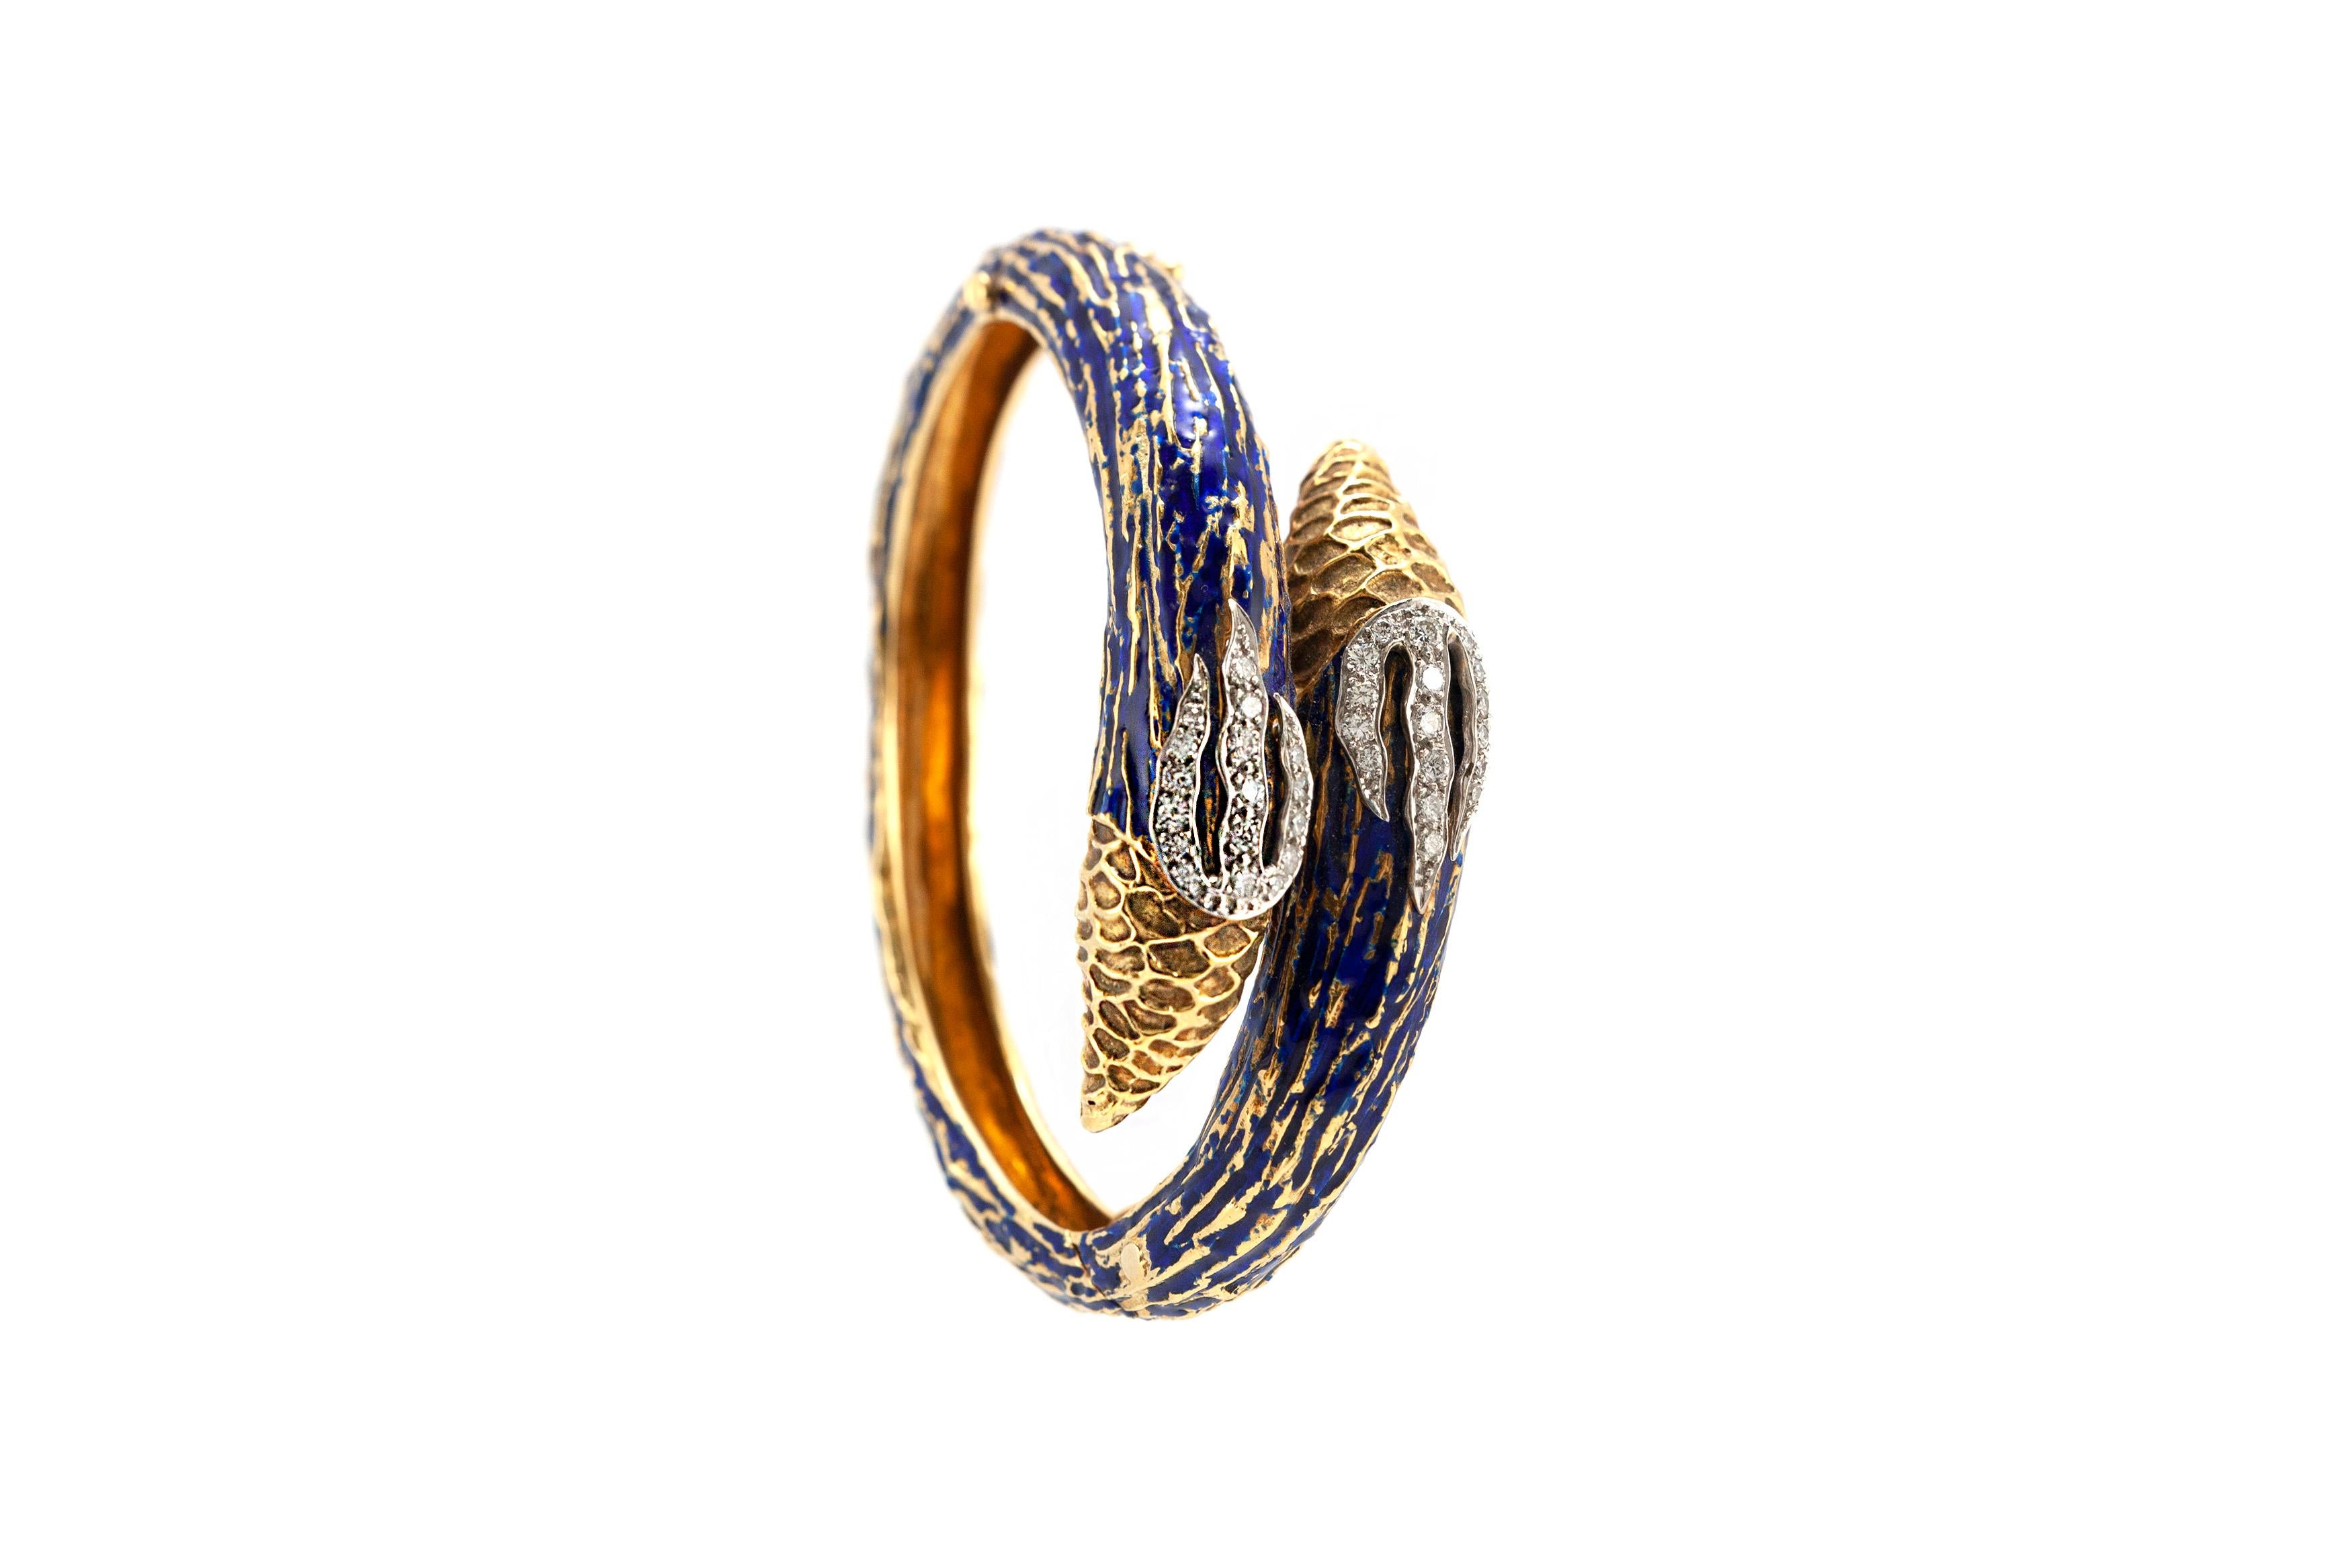 The bracelet is finely crafted in 18k yellow gold with diamonds weighing approximately total of 1.80 carat and blue enamel. 